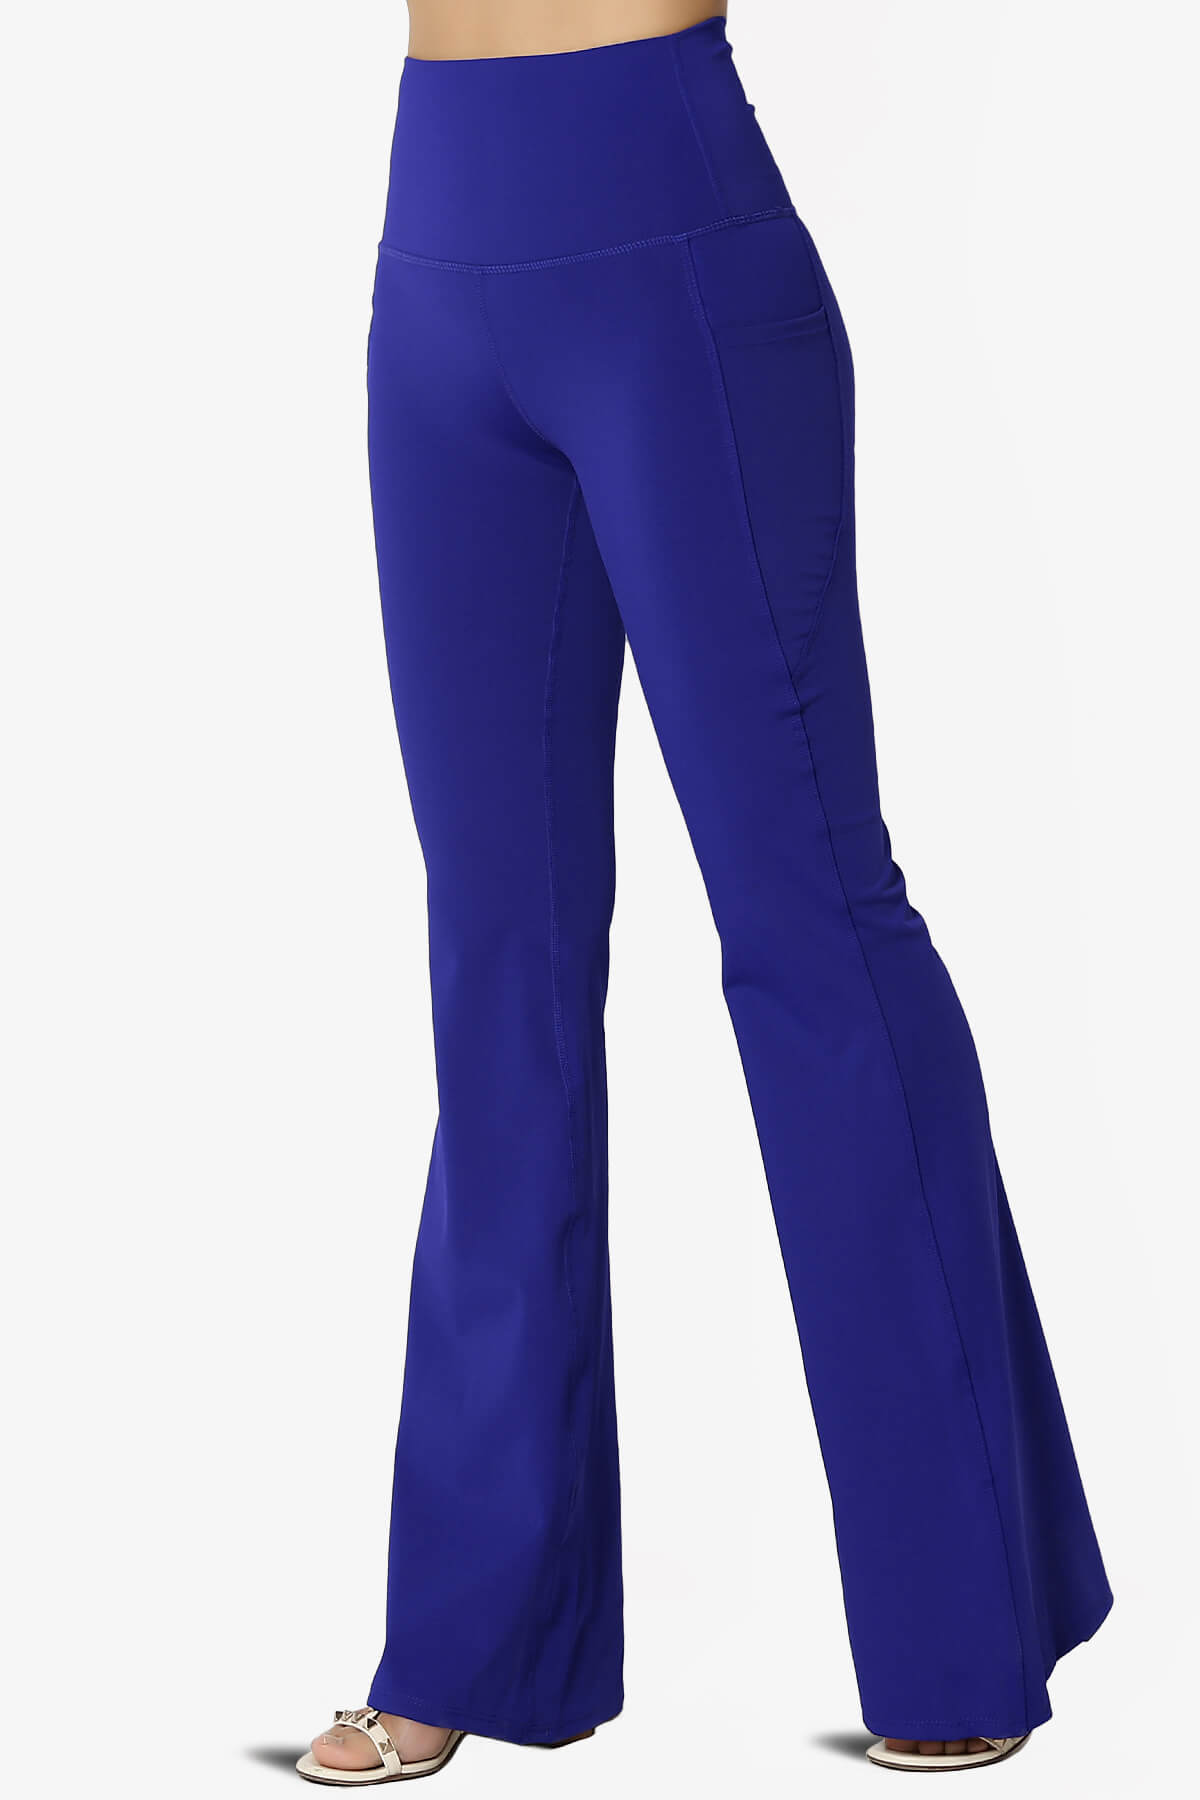 Load image into Gallery viewer, Gemma Athletic Pocket Flare Yoga Pants BRIGHT BLUE_3
